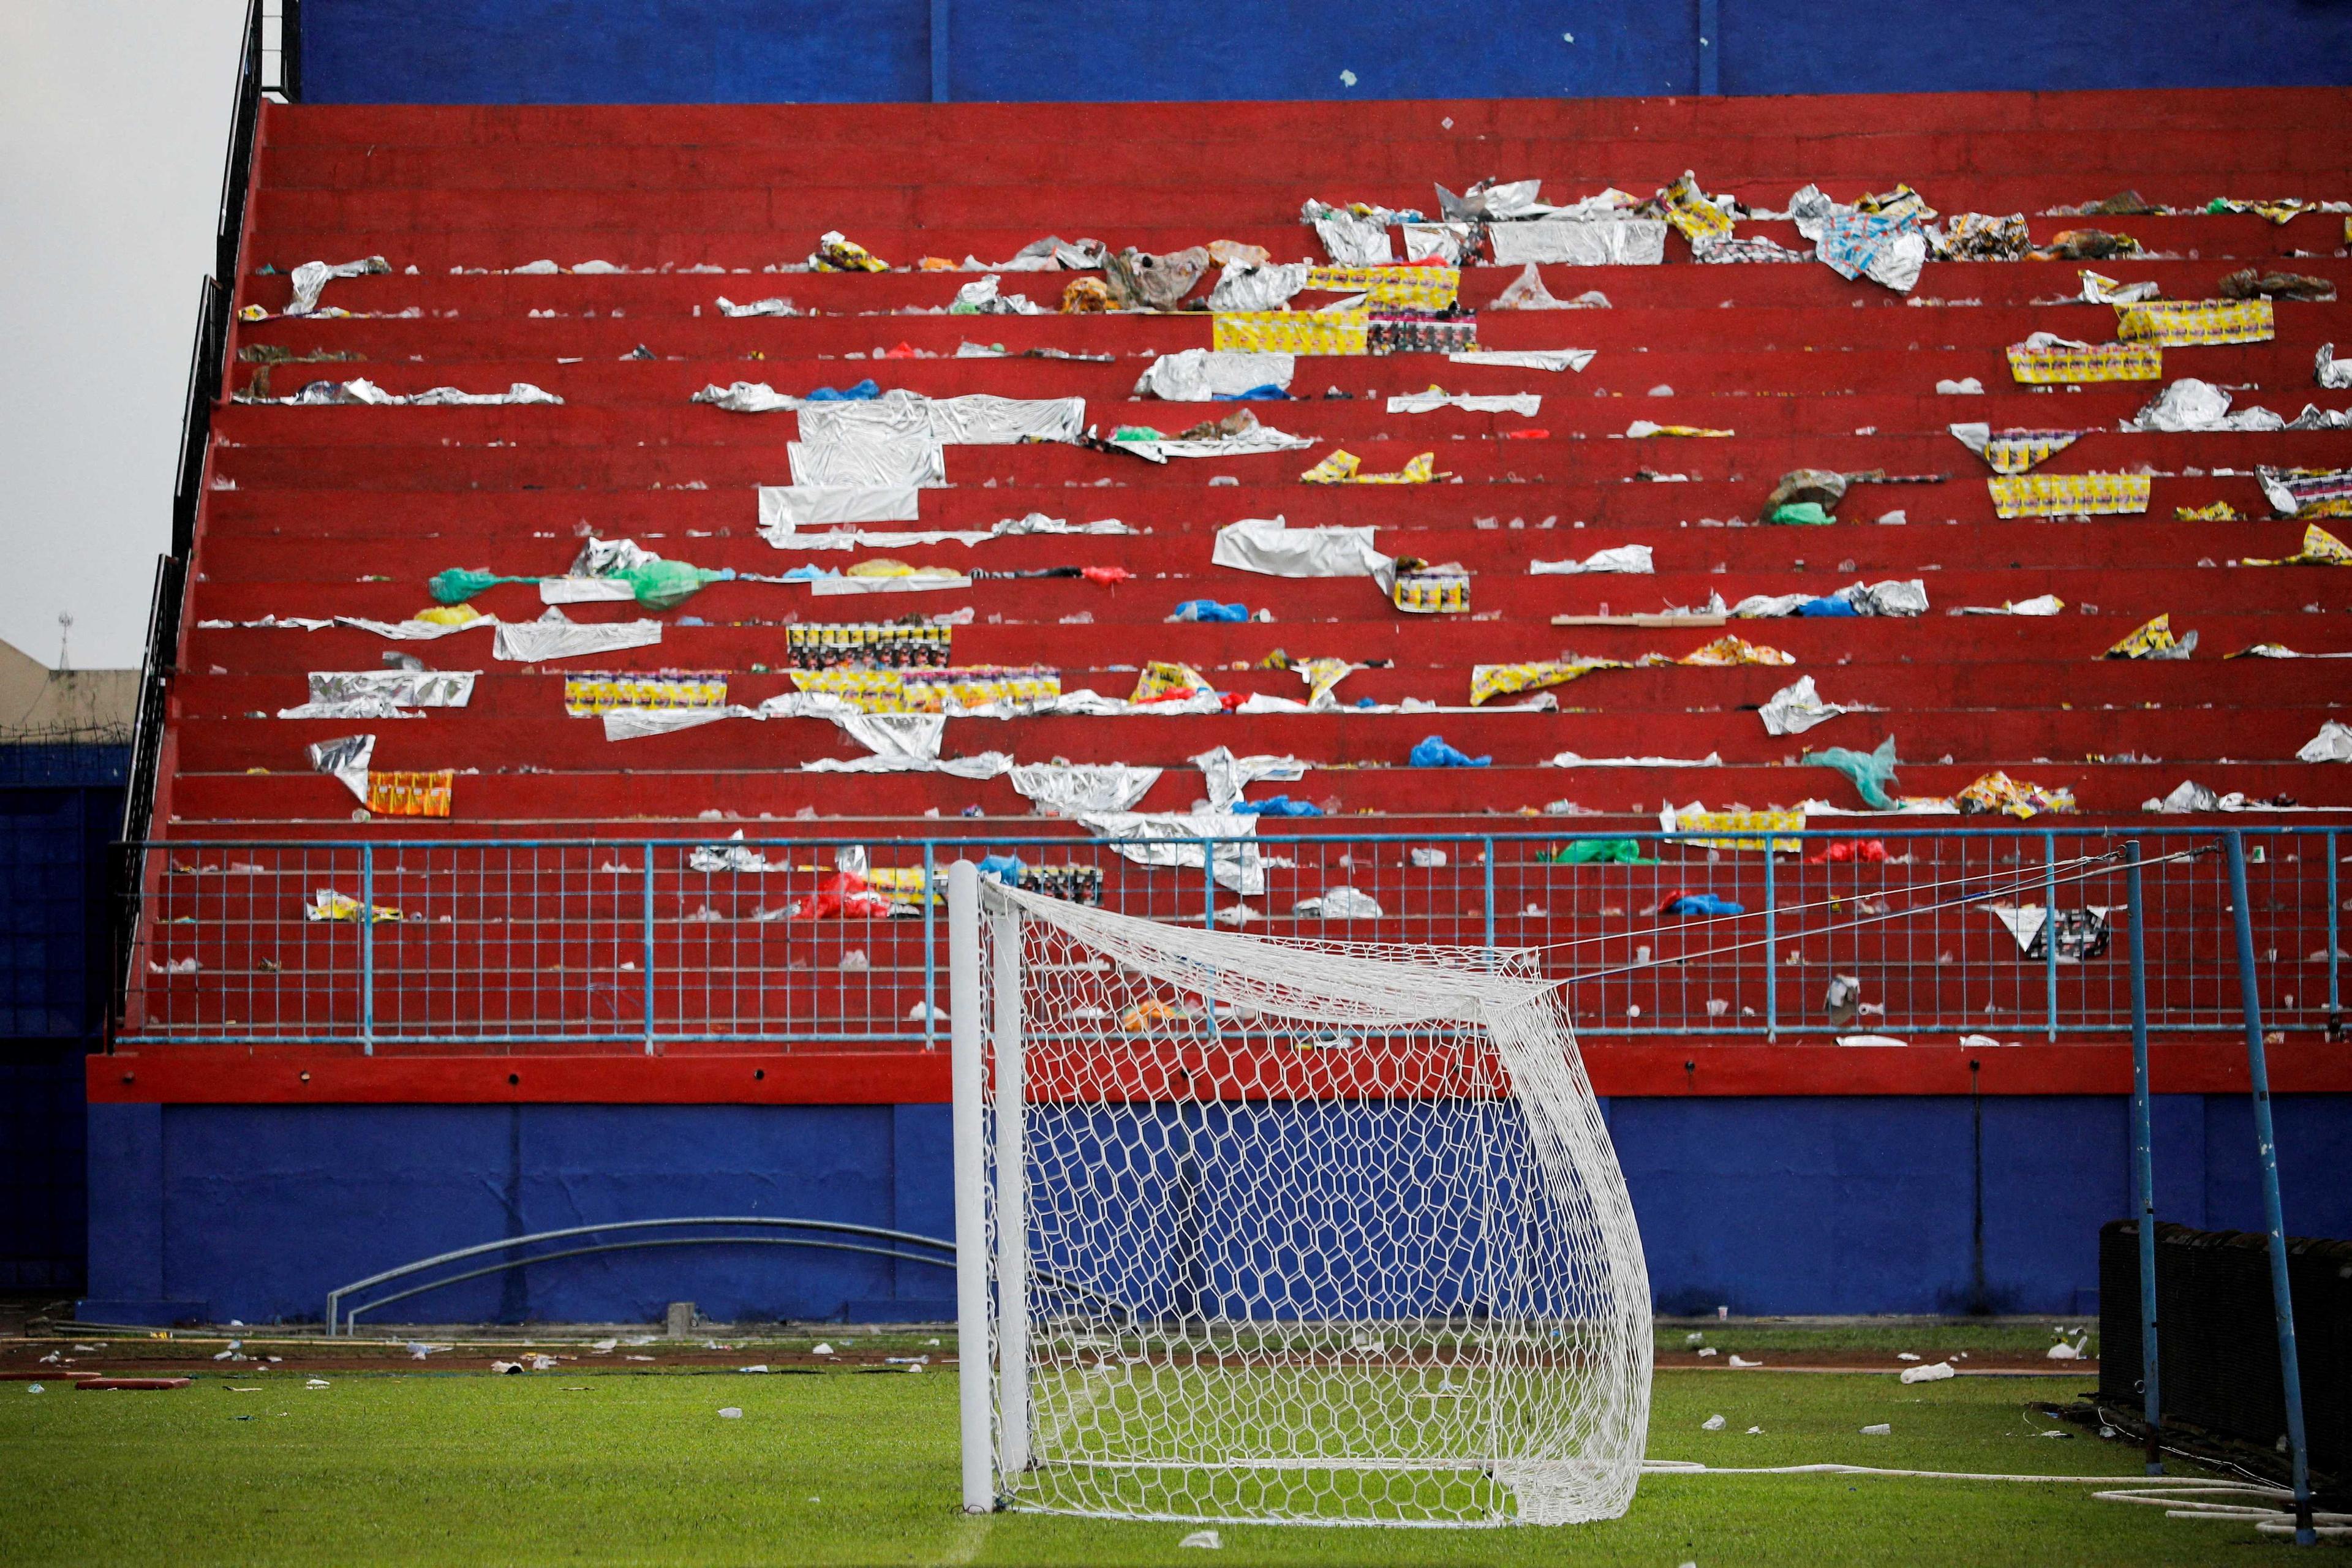 A goalpost is seen after a riot and stampede following soccer match between Arema vs Persebaya at Kanjuruhan stadium in Malang, East Java province, Indonesia, Oct 2, 2022. Photo: Reuters